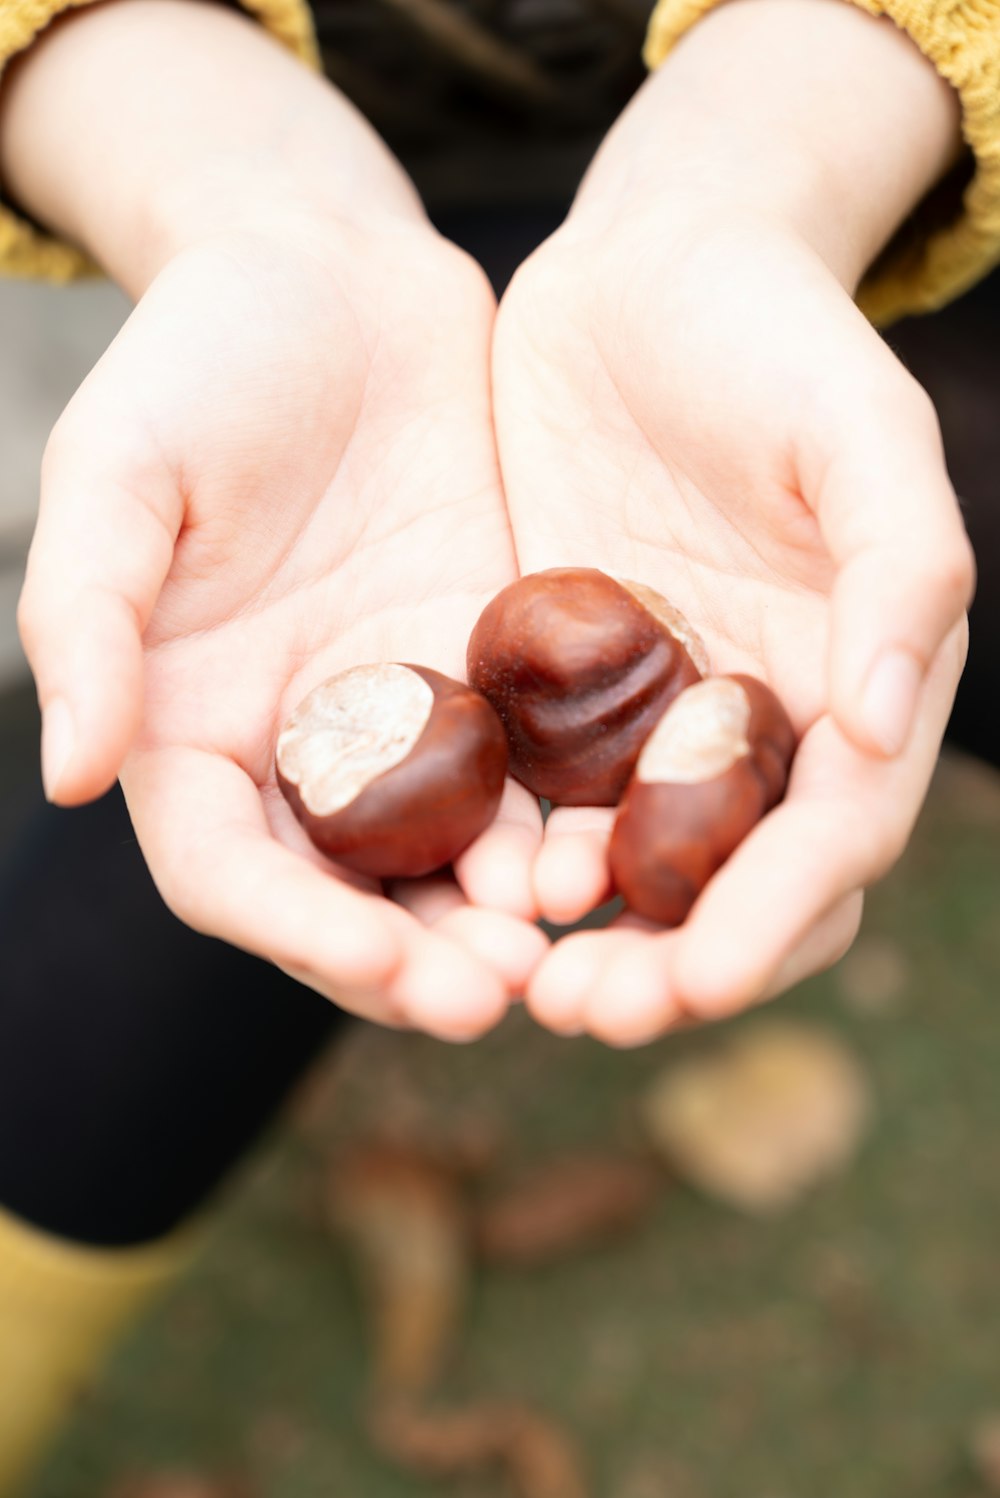 a person holding some nuts in their hands